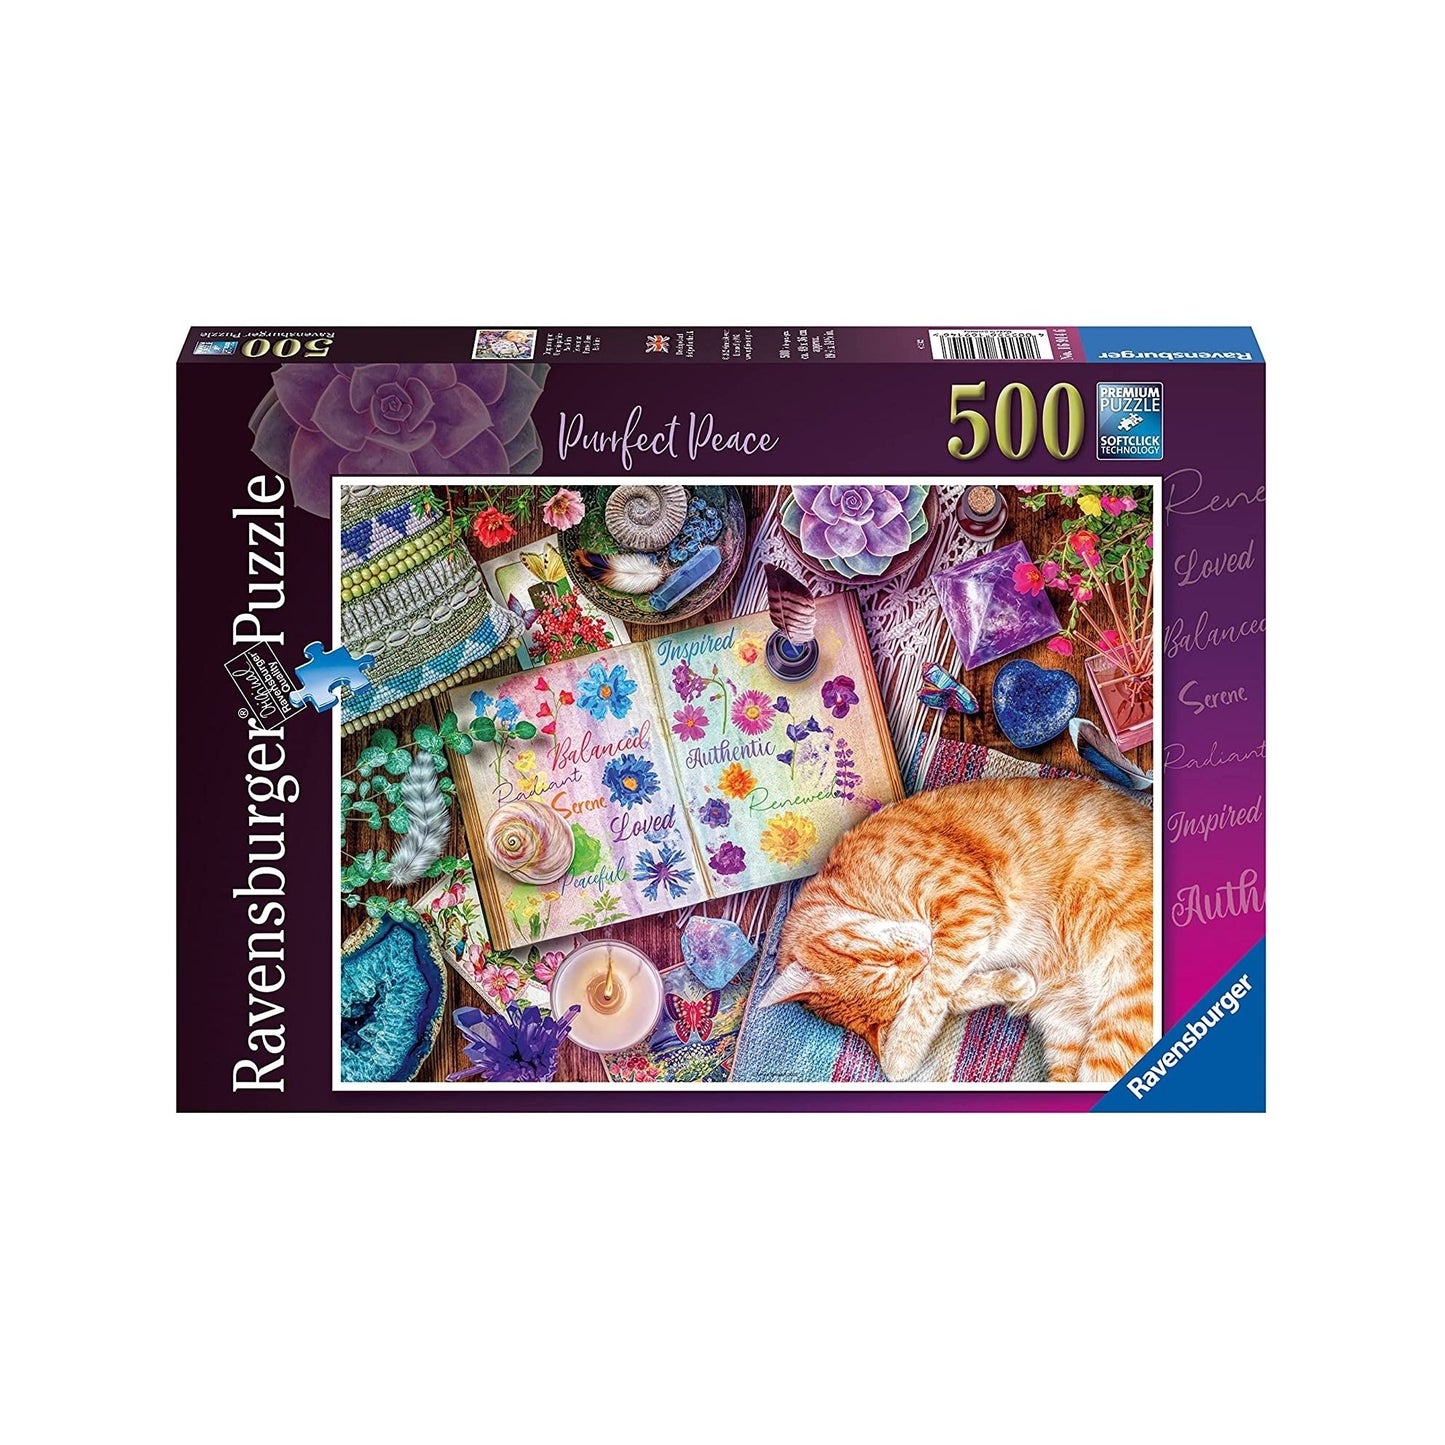 Jigsaw Puzzle - PURRFECT PEACE - 500 Pieces